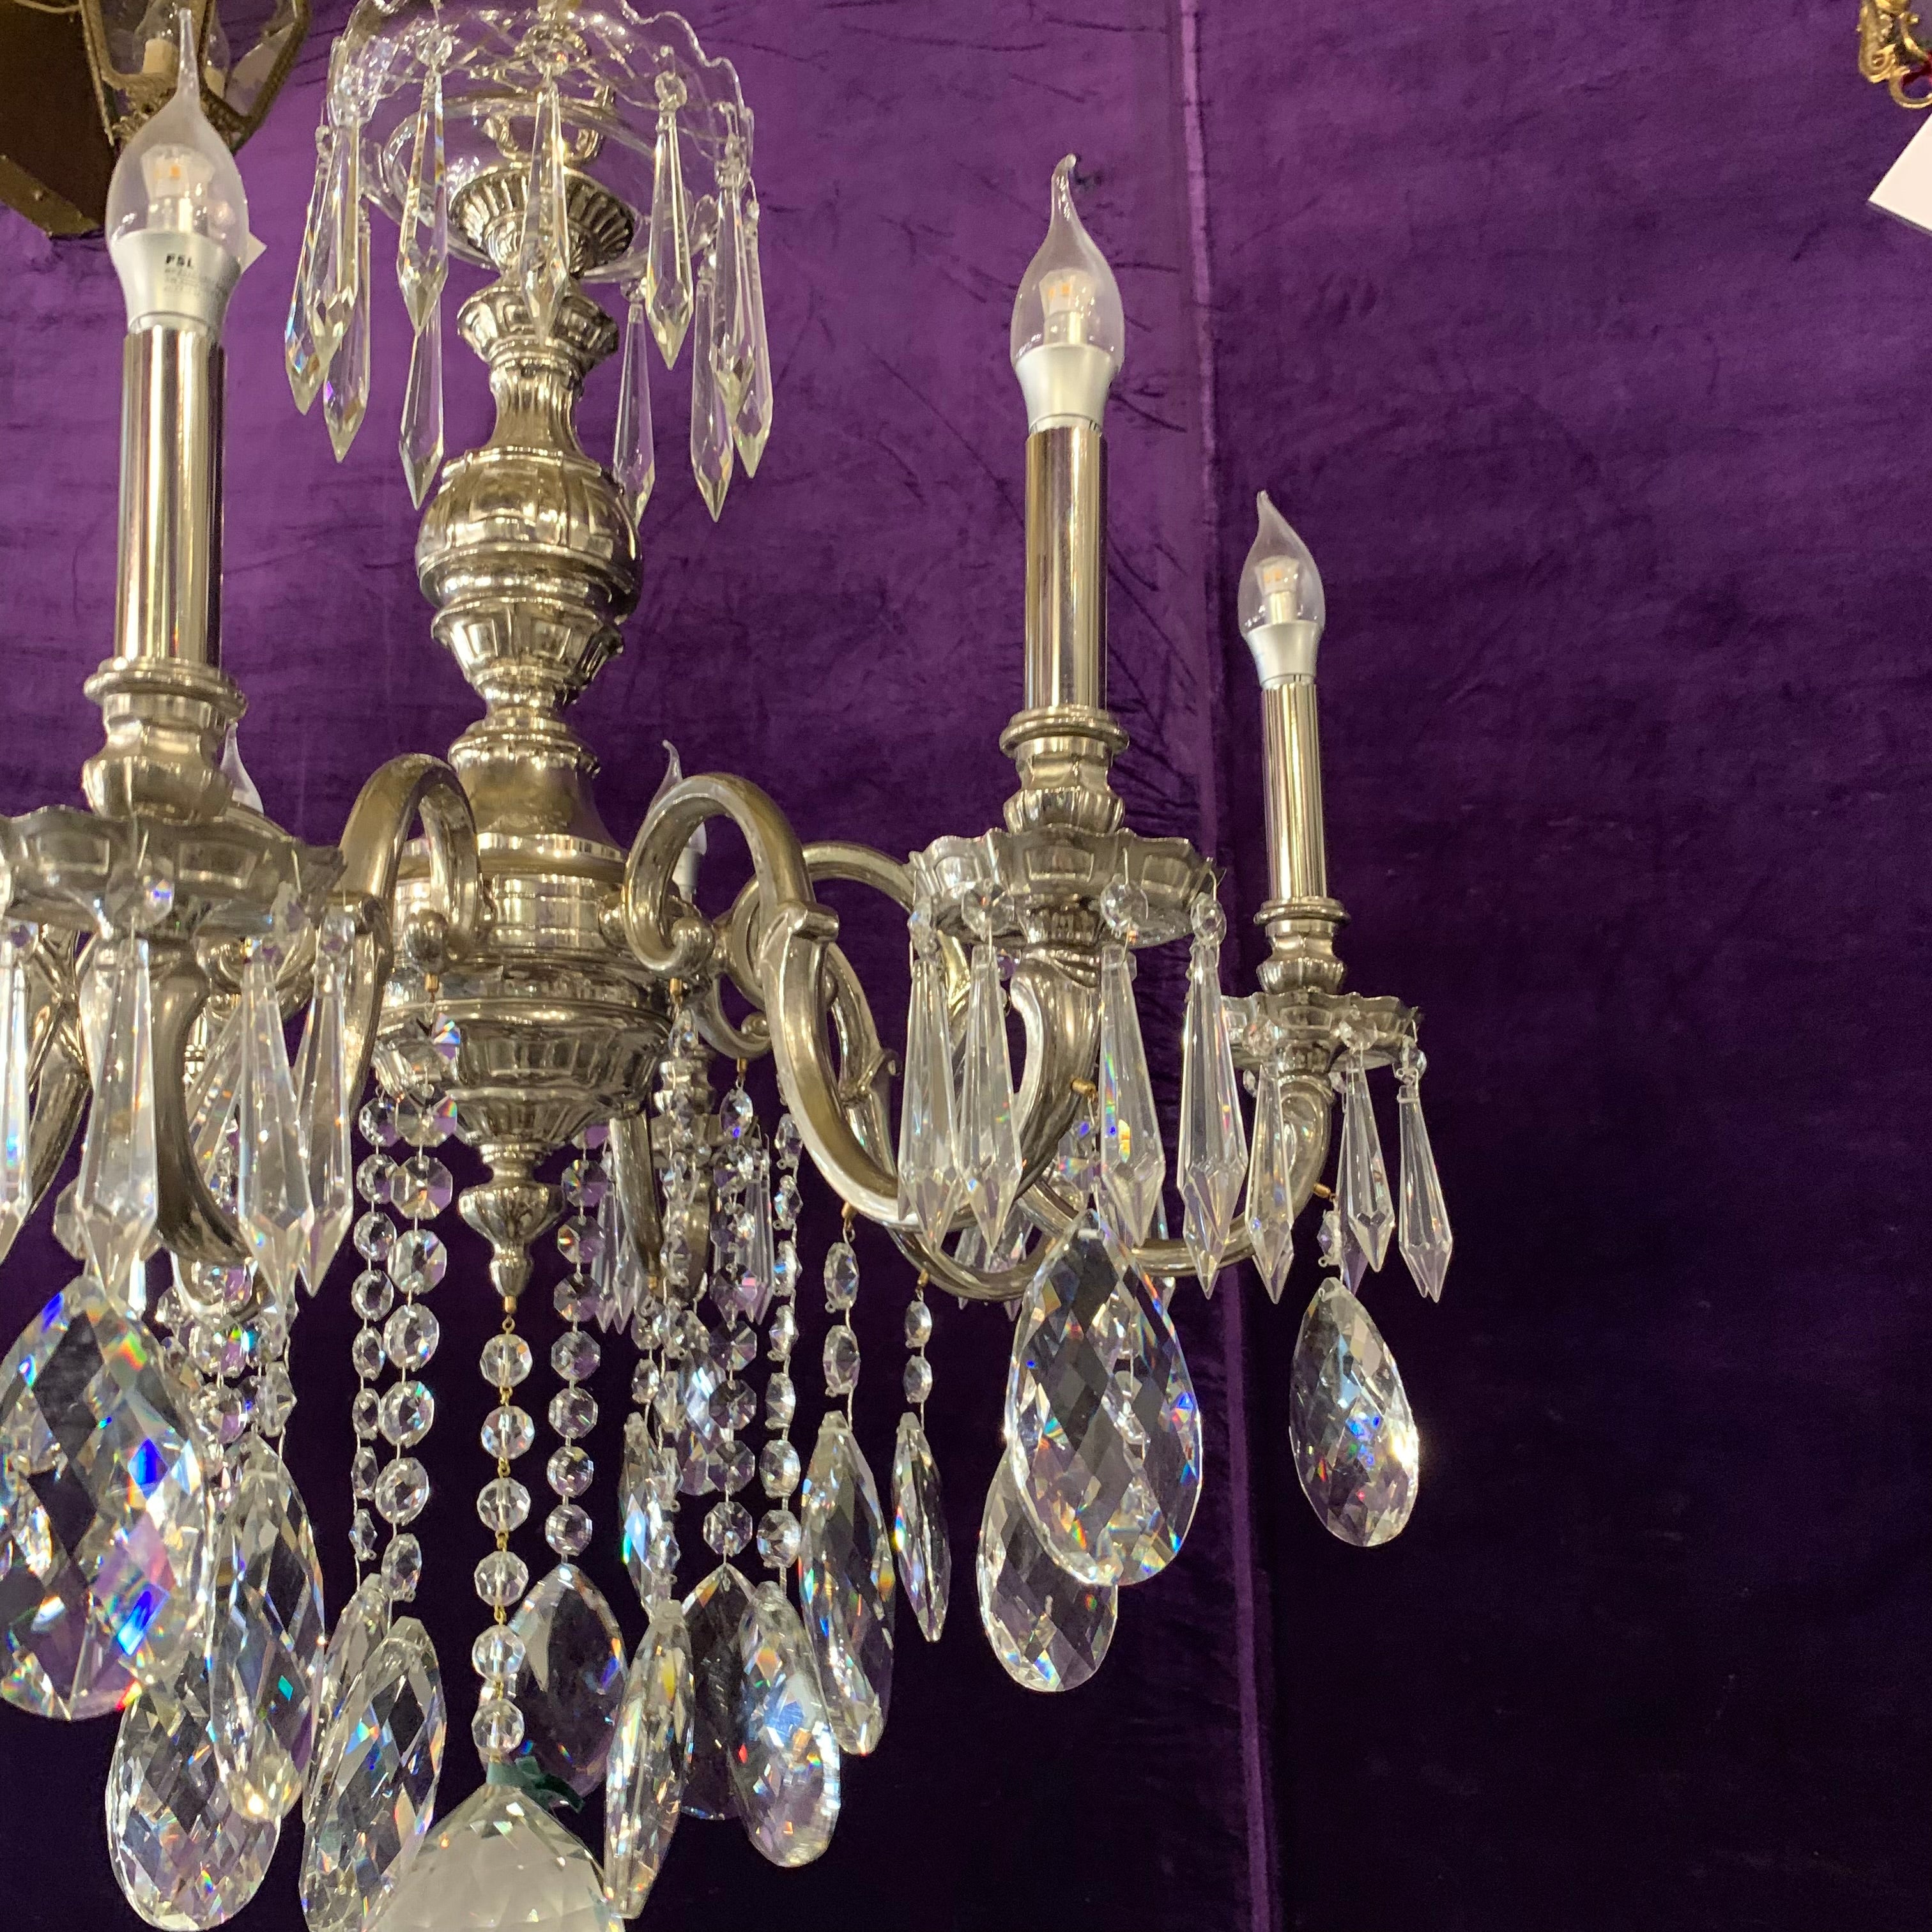 Antique Polished Nickel French Chandelier with Tear Drop Crystal